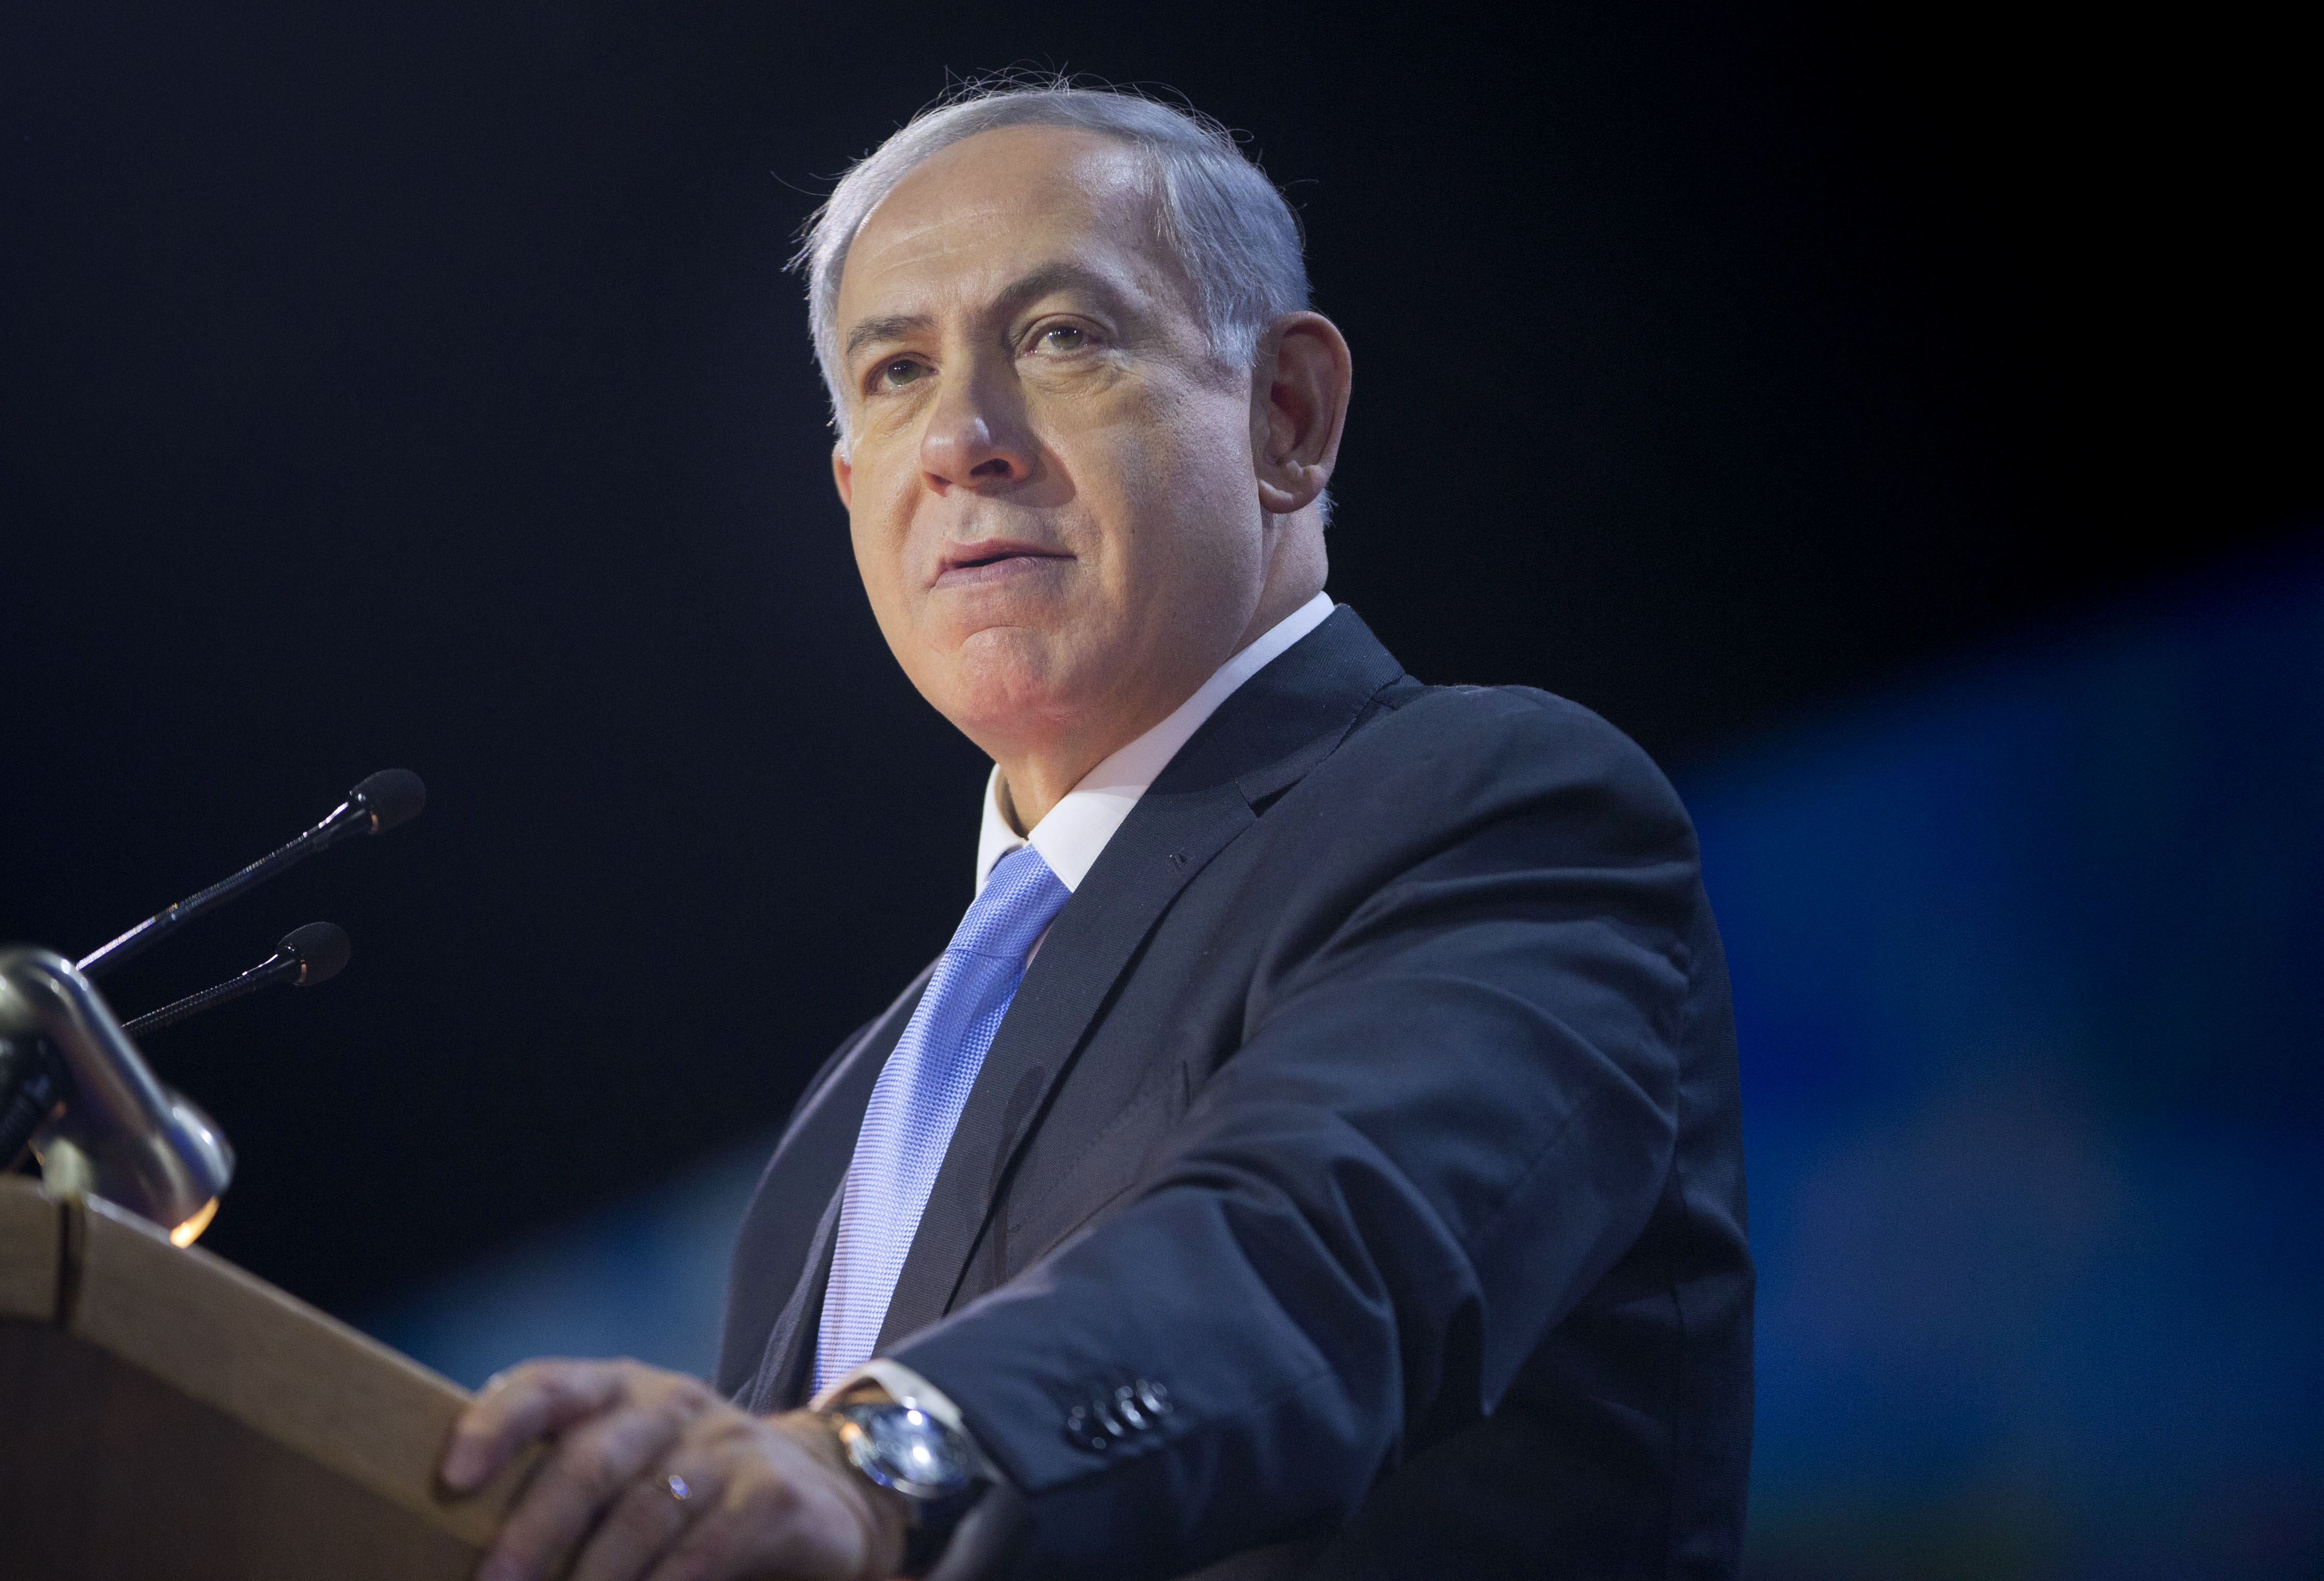 Israeli Prime Minister Benjamin Netanyahu speaks at the American Israel Public Affairs Committee (AIPAC) Policy Conference in Washington on March 2, 2015. (Pablo Martinez Monsivais—AP)